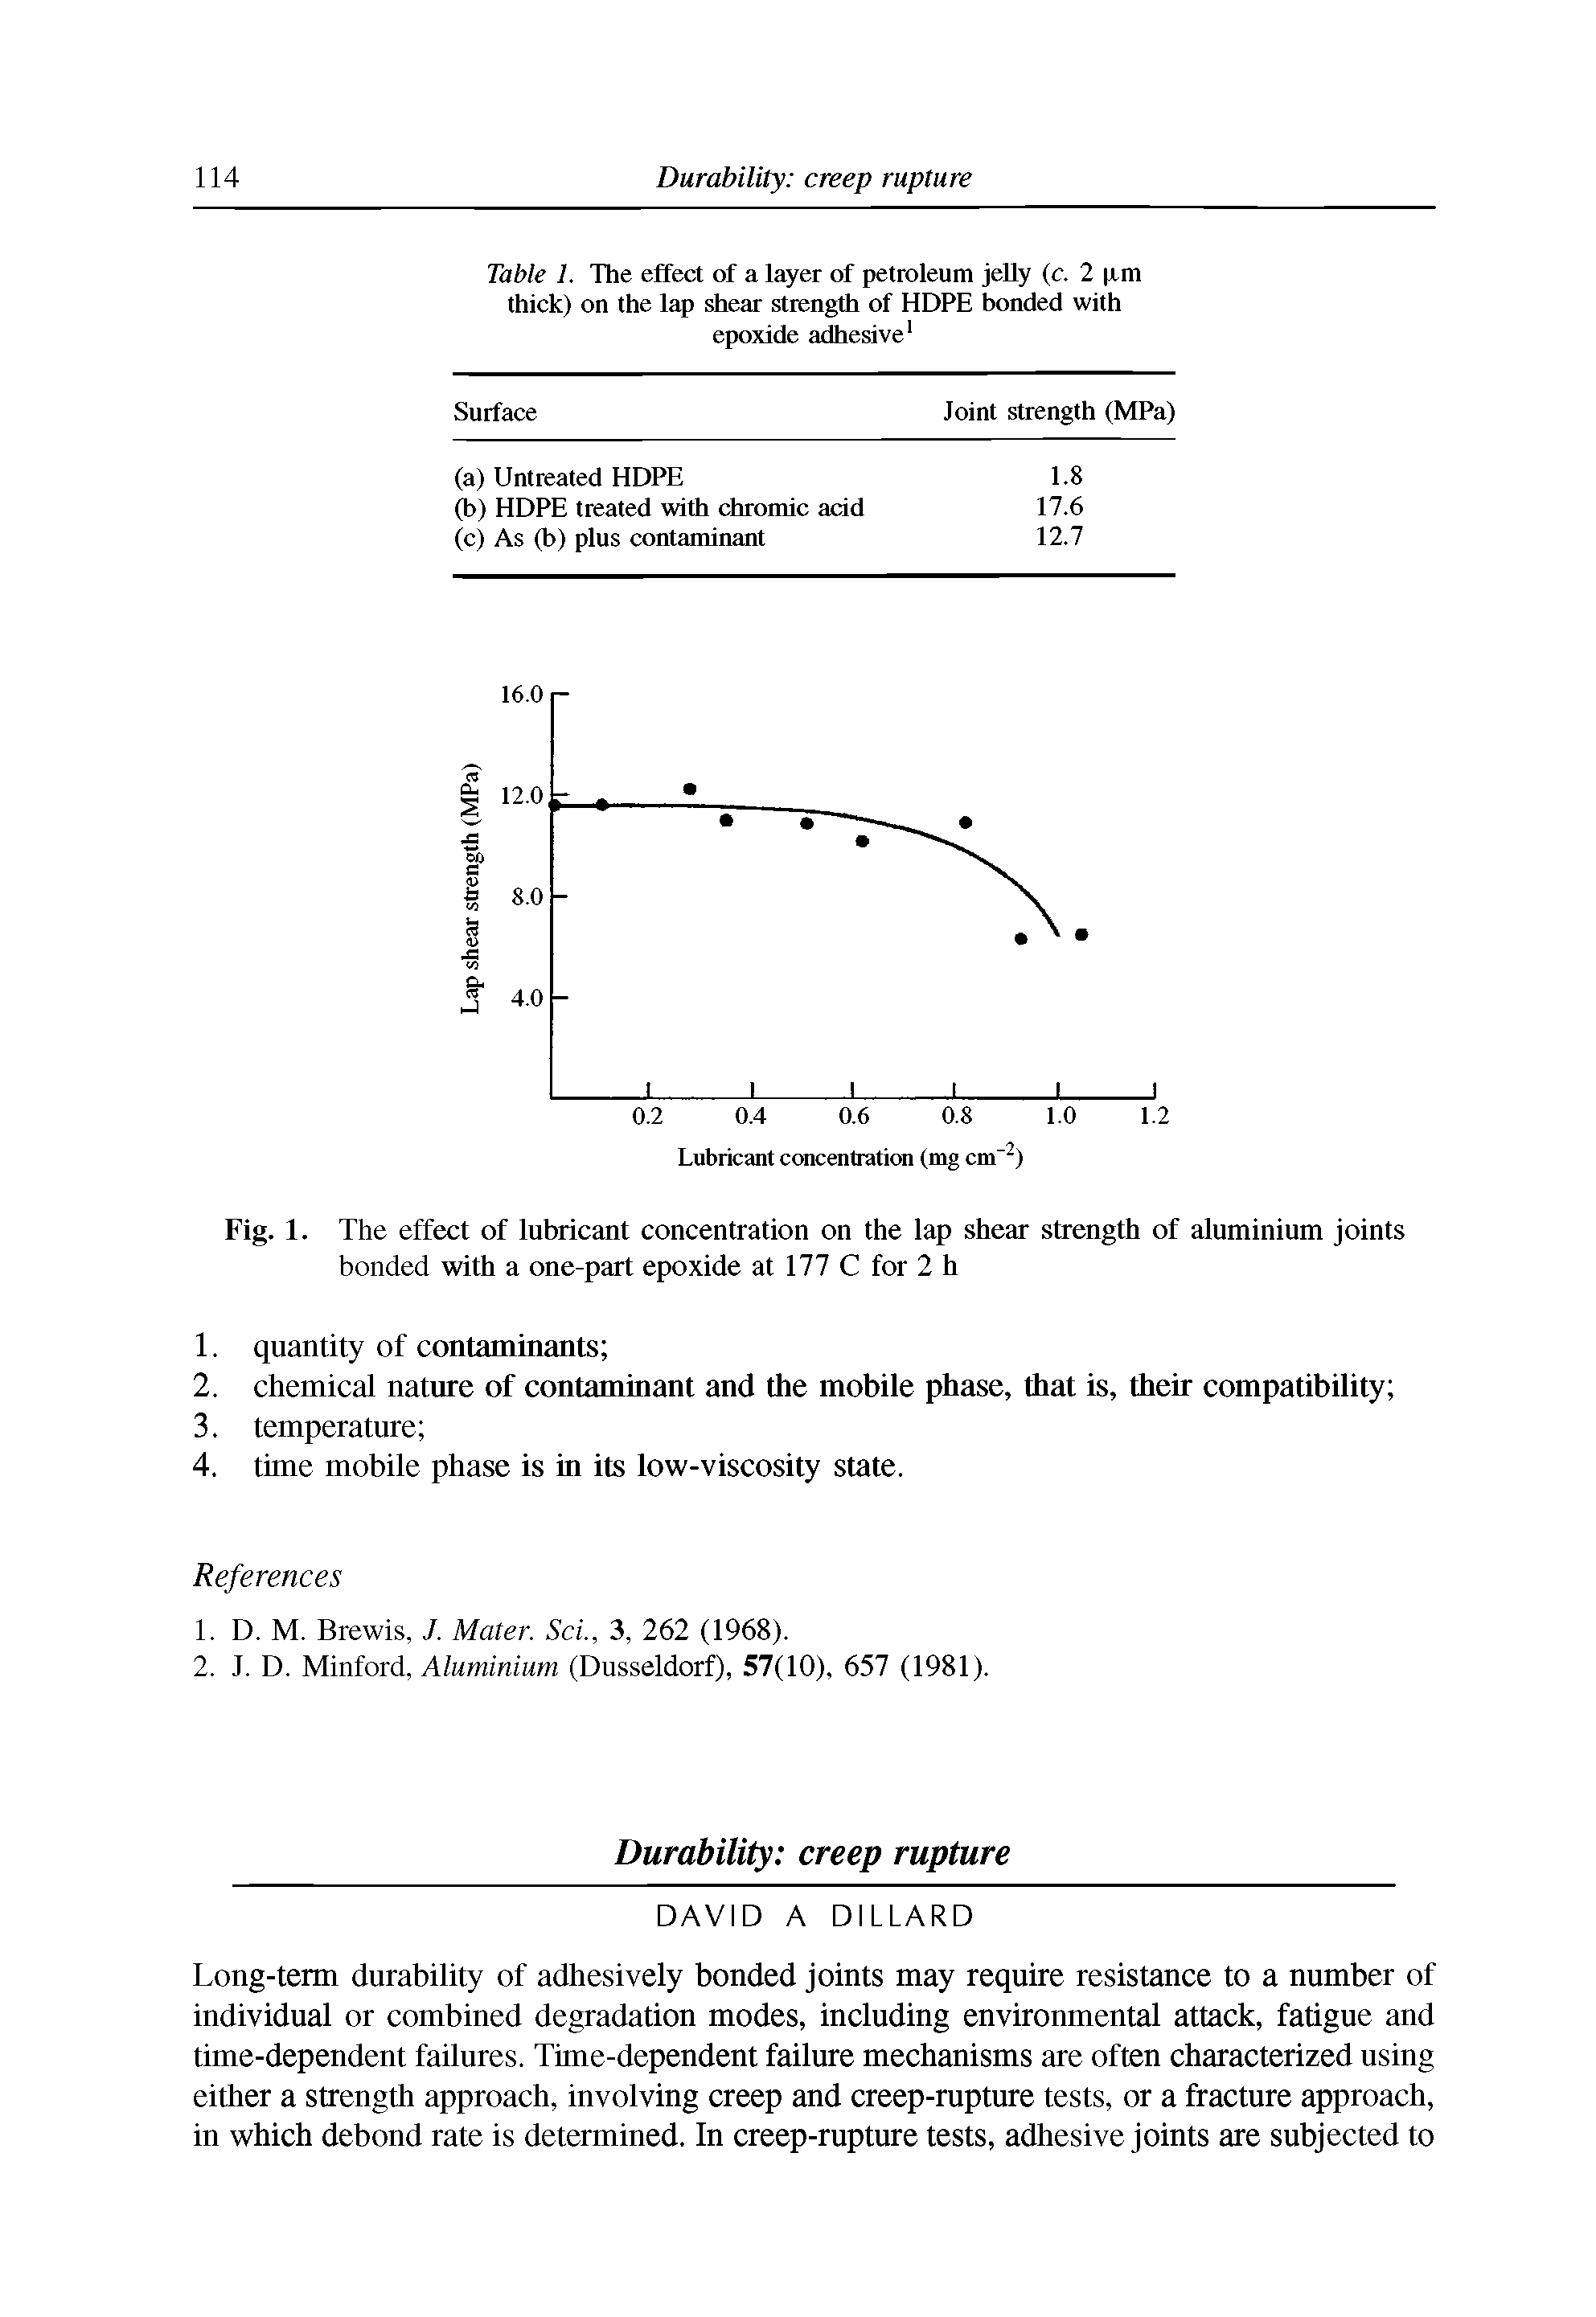 Table I. The effect of a layer of petroleum jelly (c. 2 p,m thick) on the lap shear strength of HDPE bonded with epoxide adhesive ...